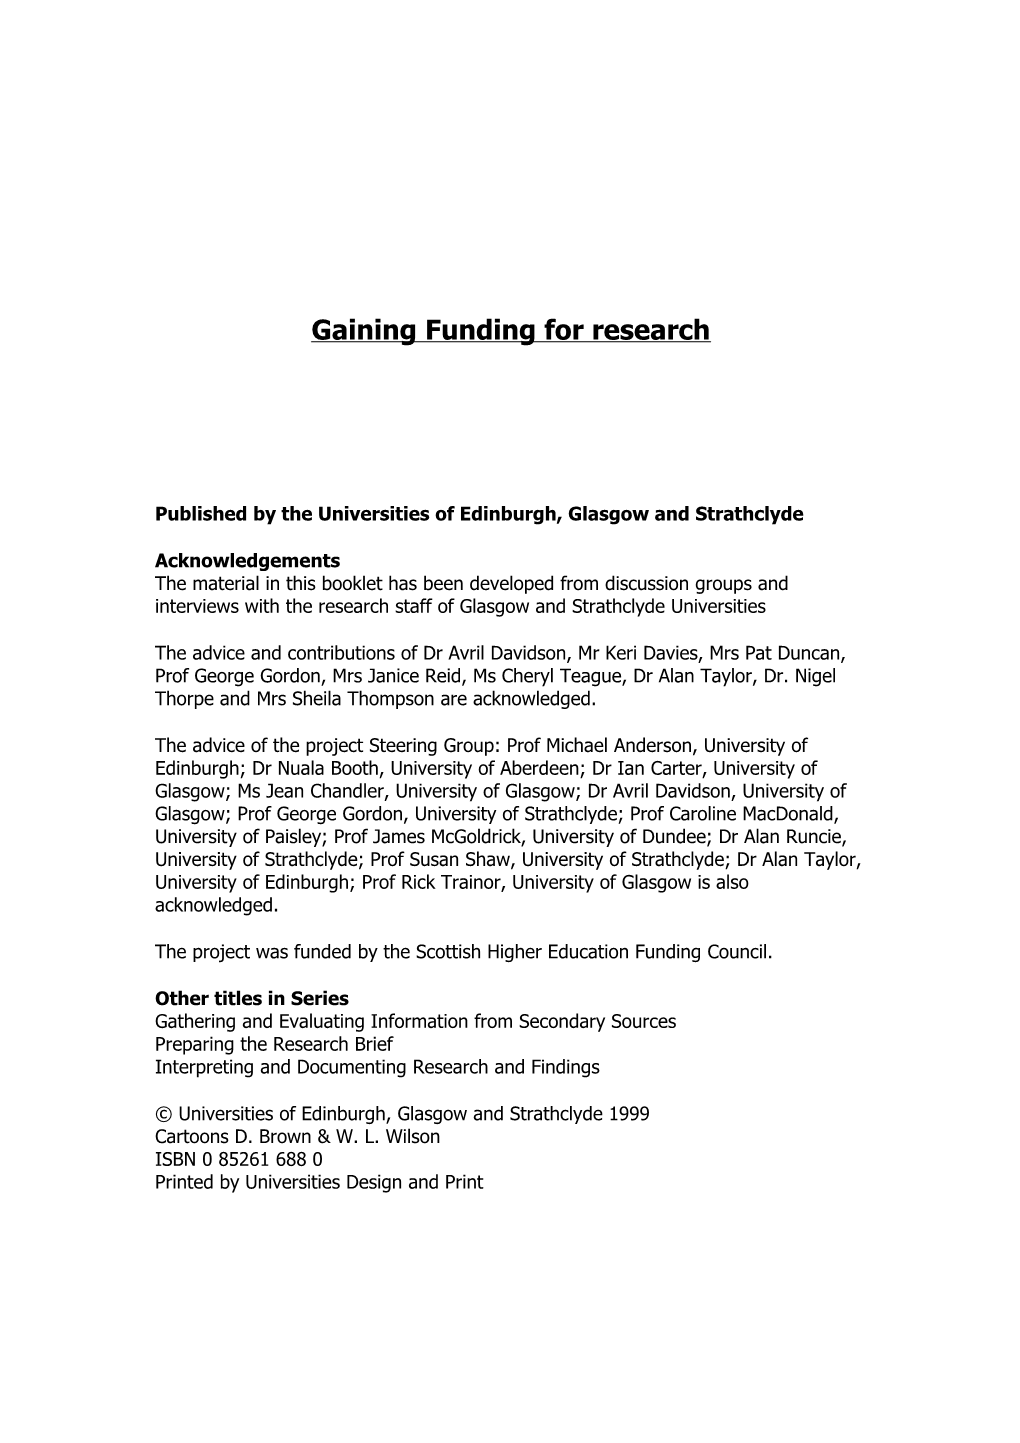 Gaining Funding for Research